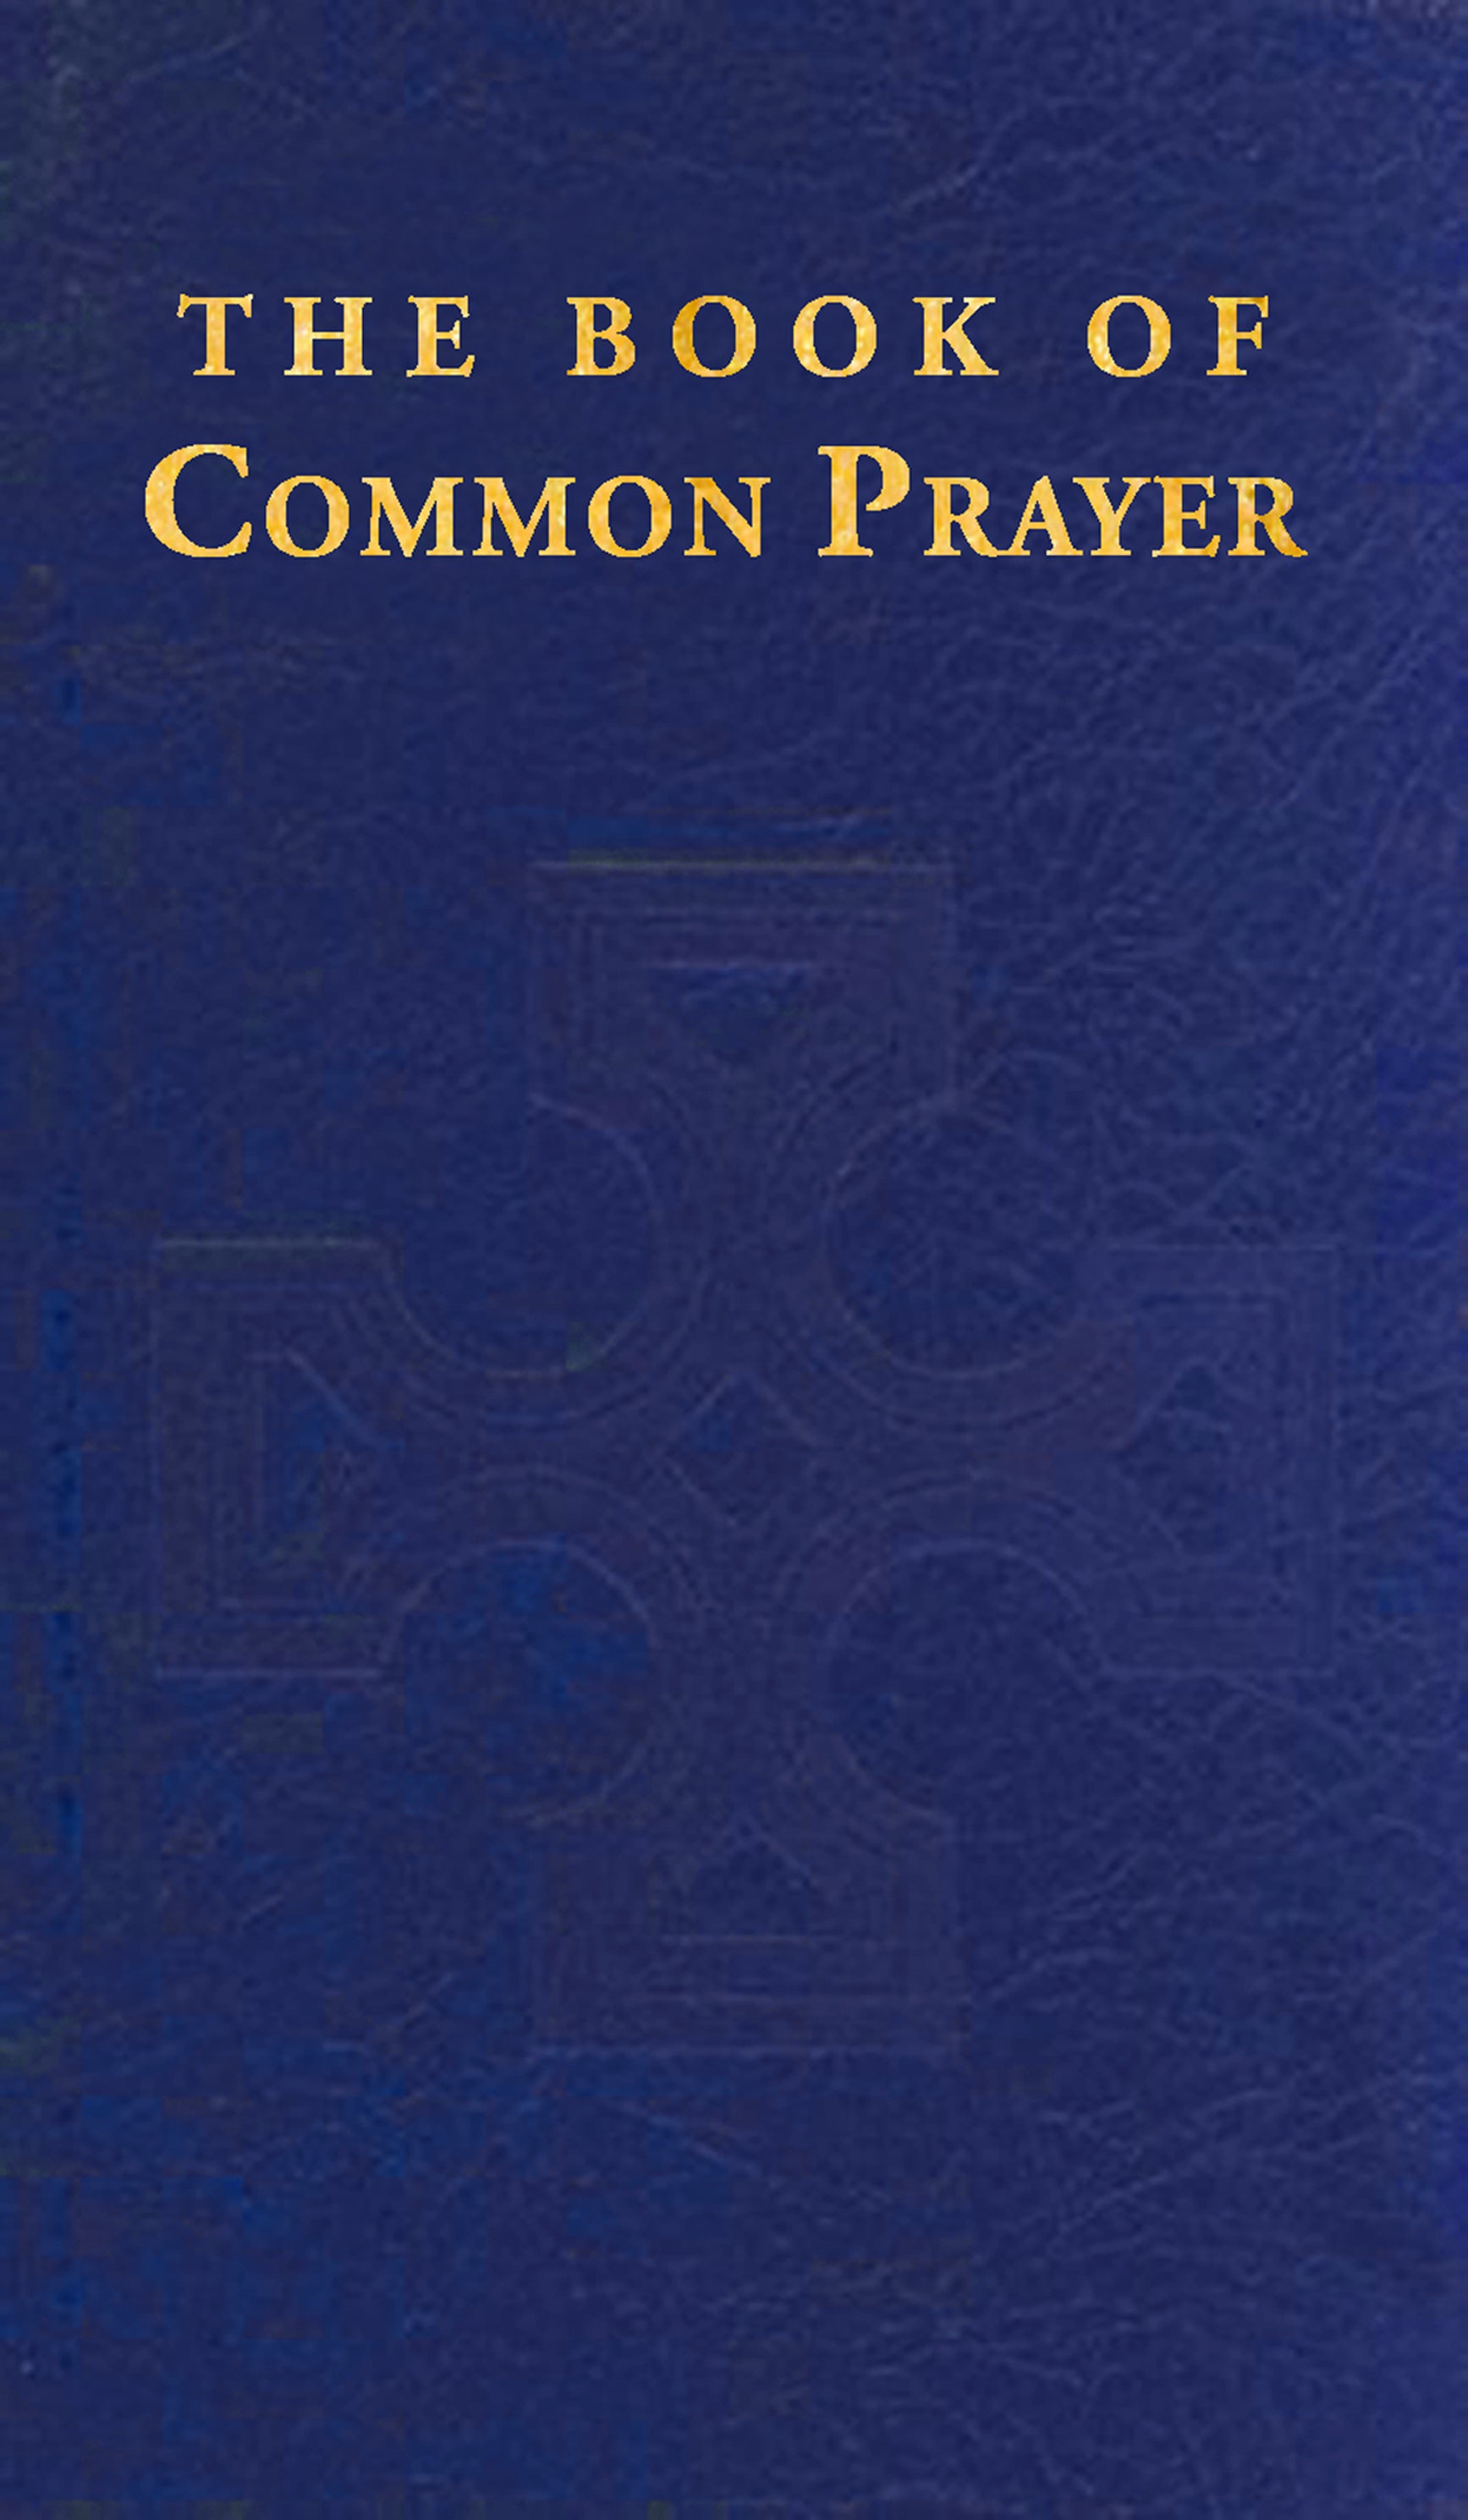 Image of Church Of Ireland Book Of Common Prayer (BCP) Desk Edition other